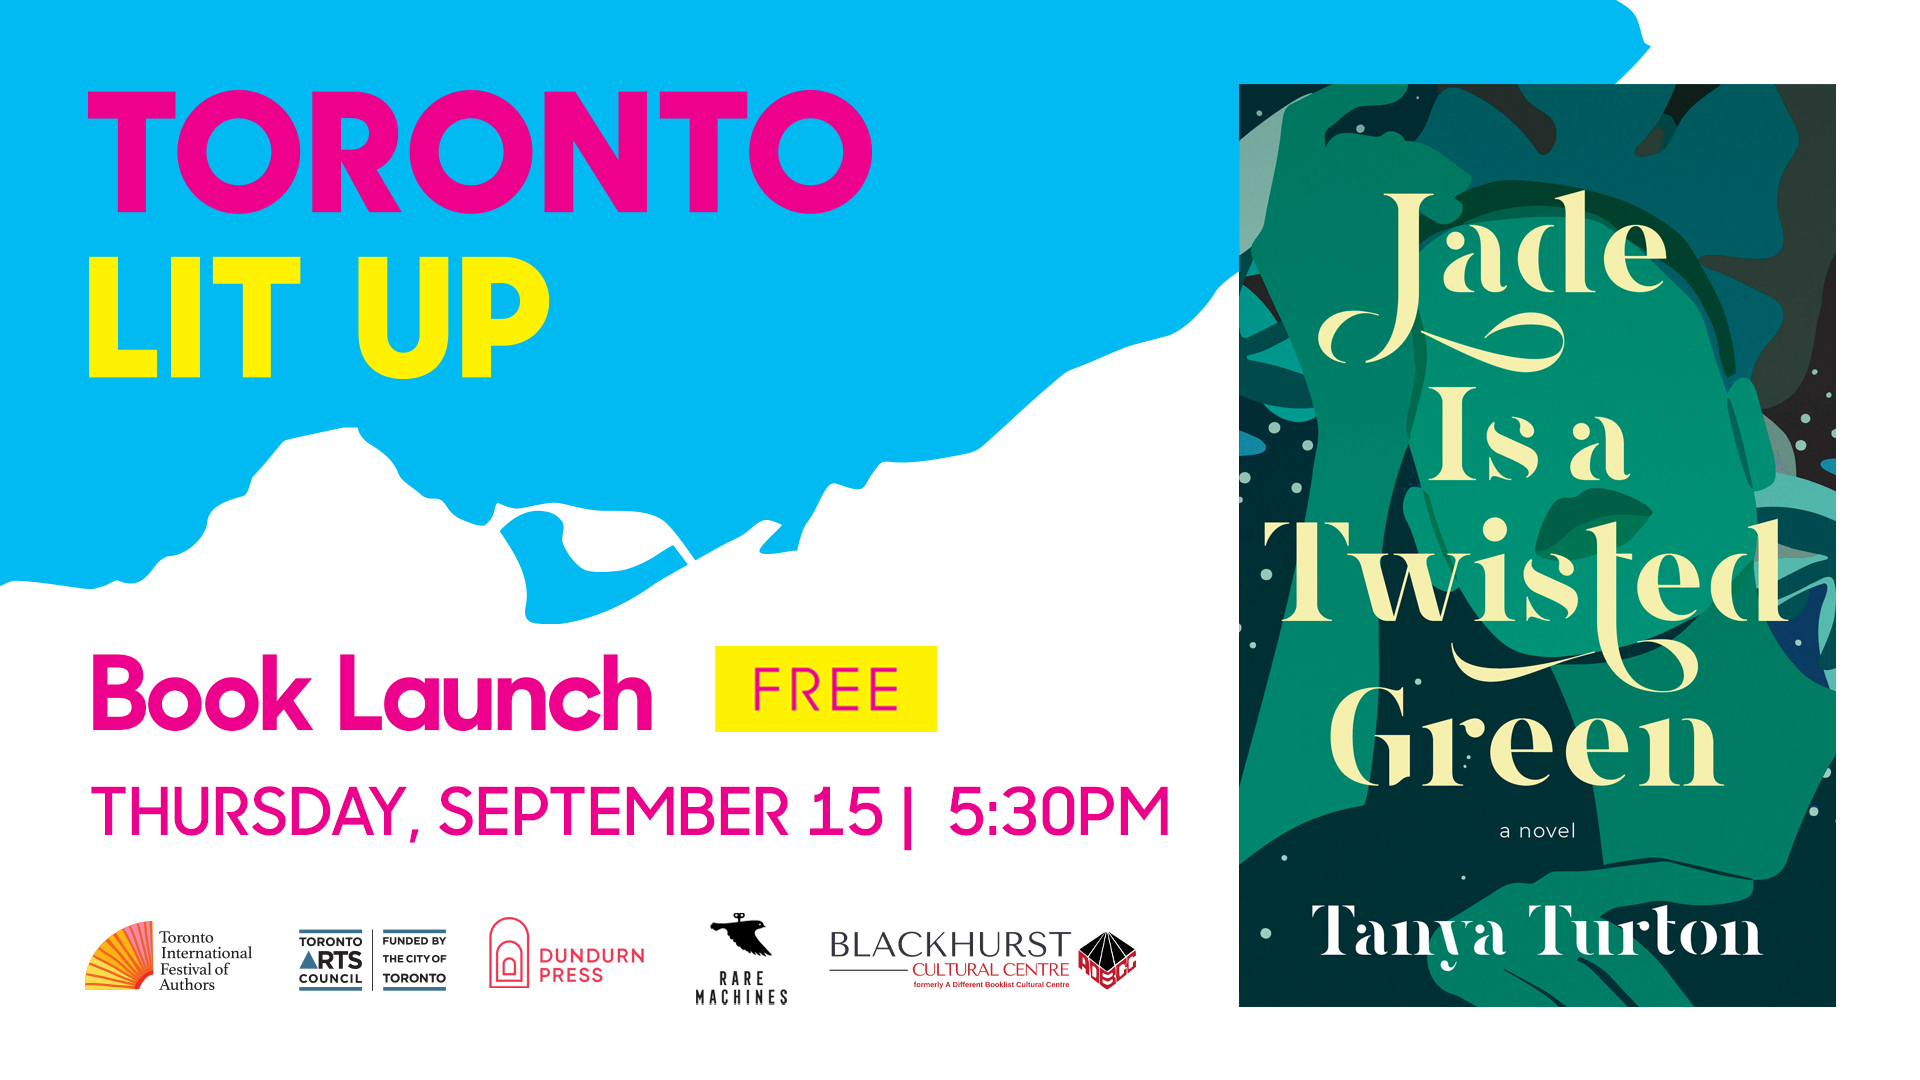 Tayna Turton's Toronto Lit Up banner with the book cover of Jade is a Twisted Green and "Book Launch Free Thursday September 15 5:30pm". Includes TIFA, Toronto Arts Council, Dundurn Press, Rare Machine and Blackhurst Cultural Centre logos